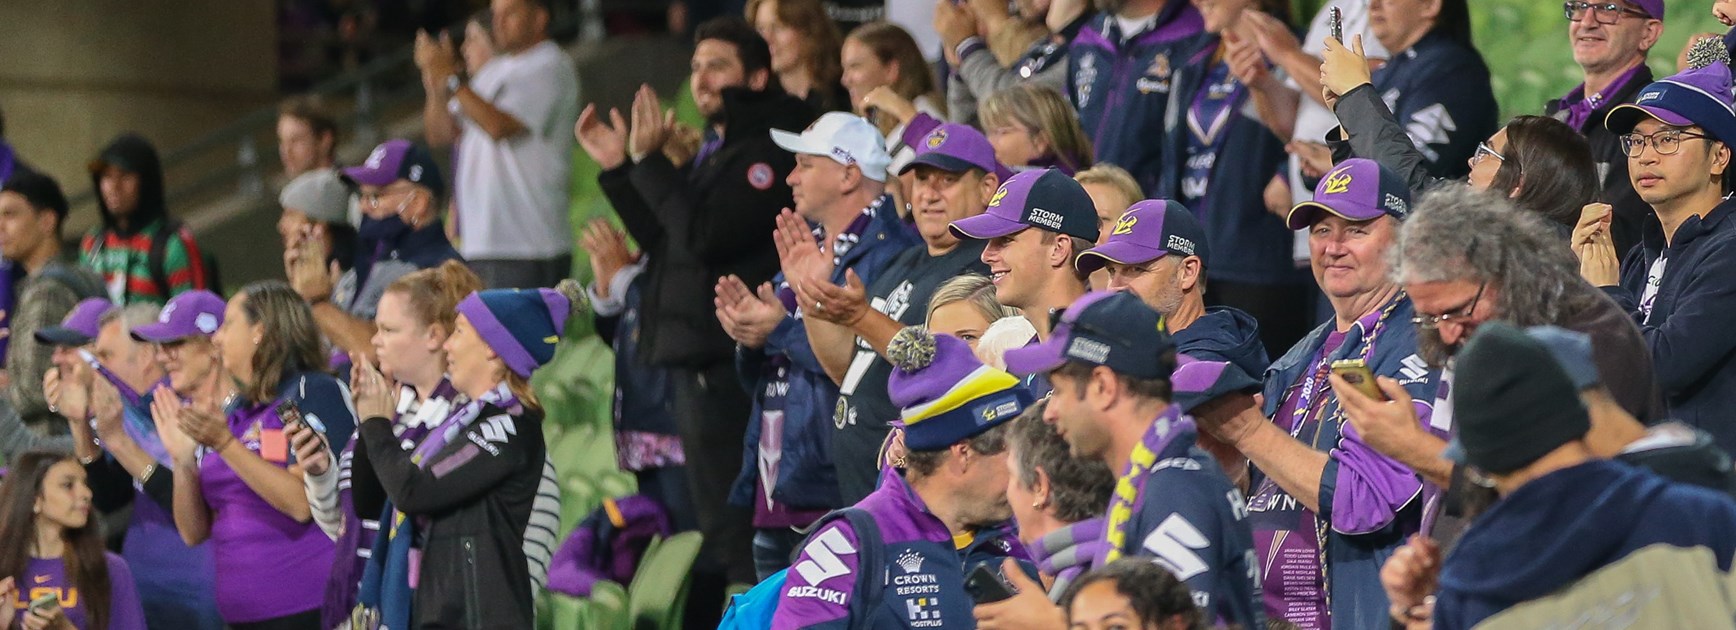 AAMI Park crowd capacity lifted to 75 percent